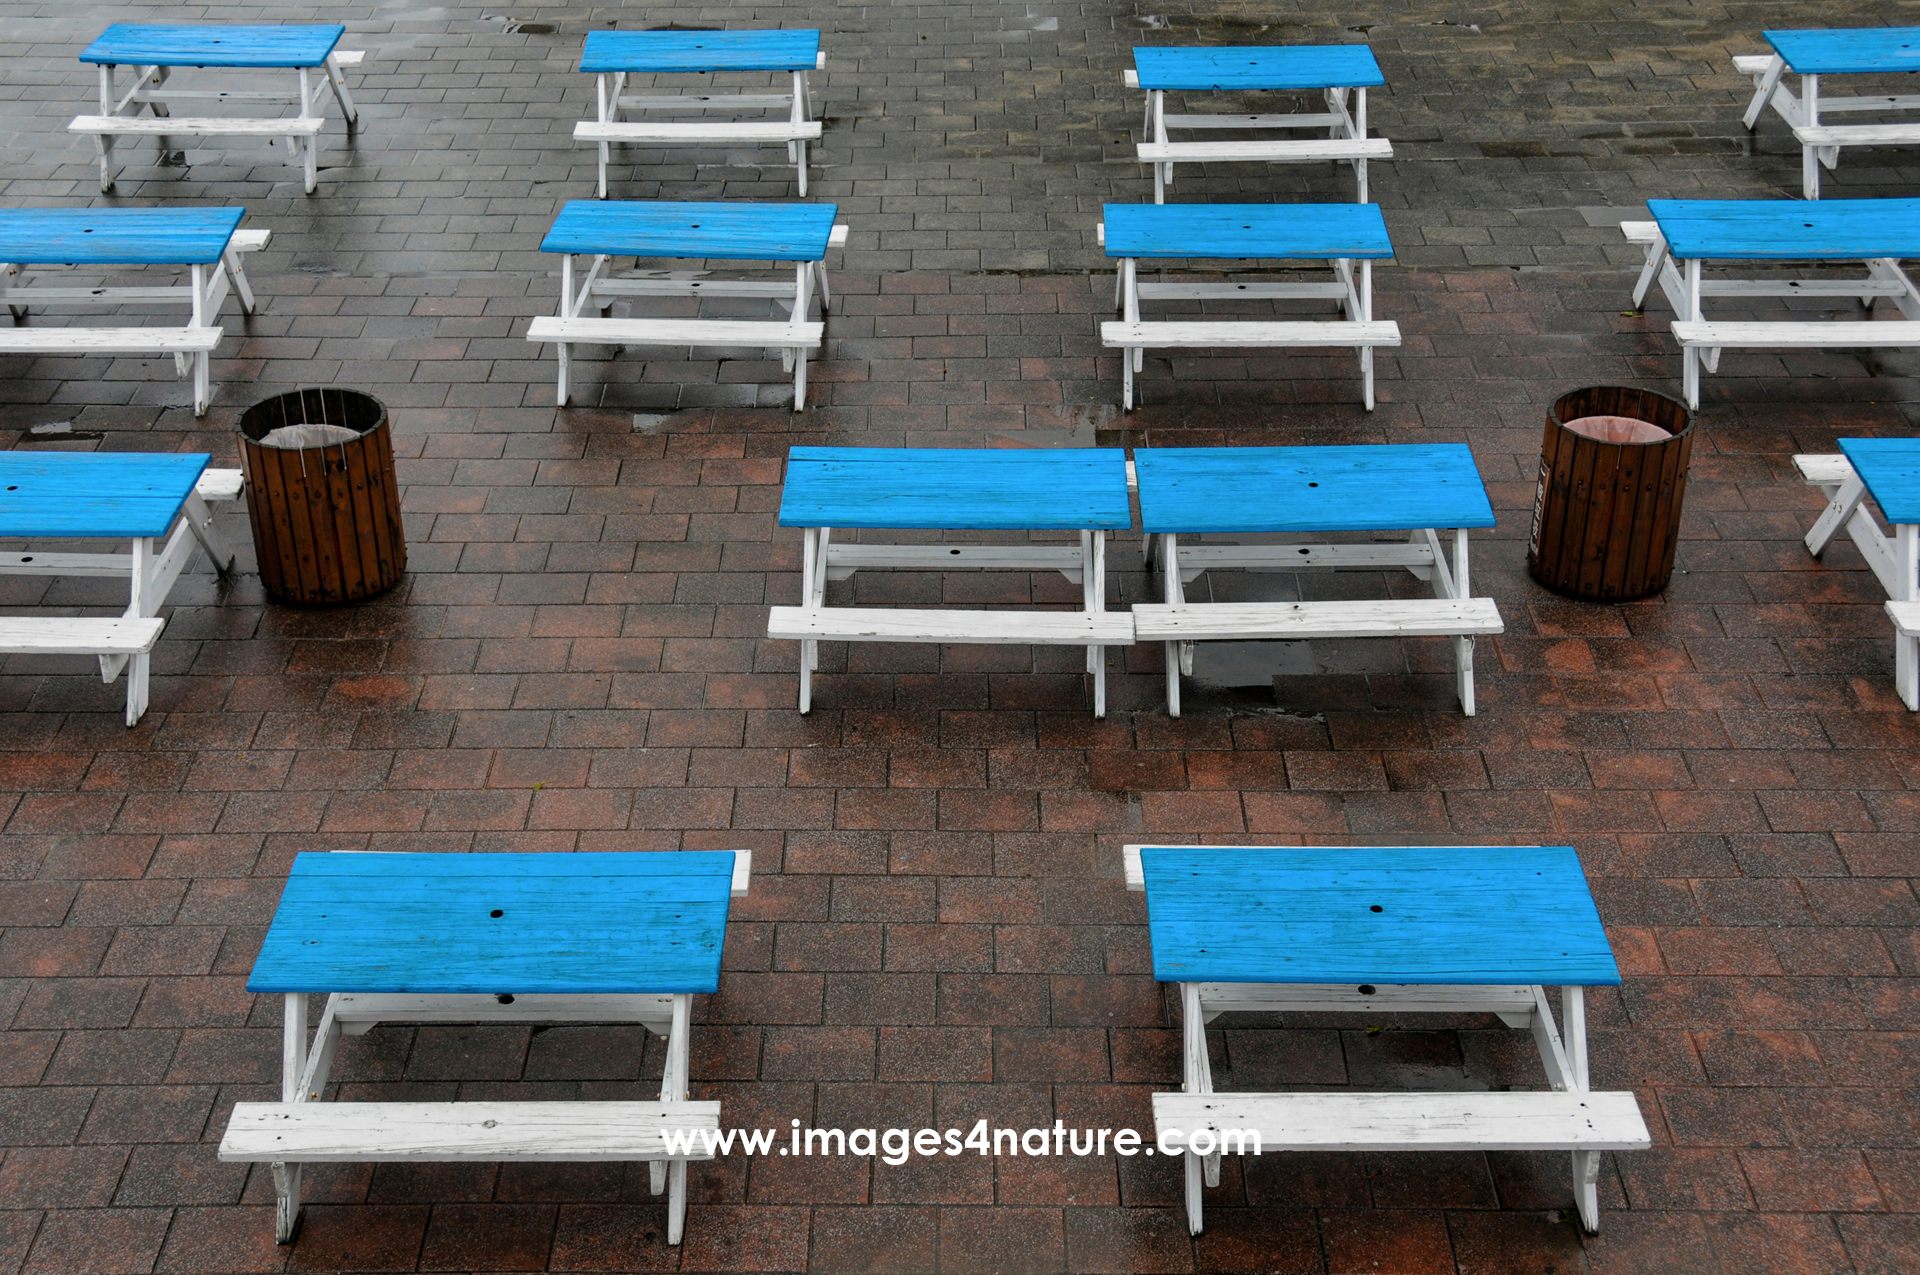 Many blue tables with white benches on red tiled floor